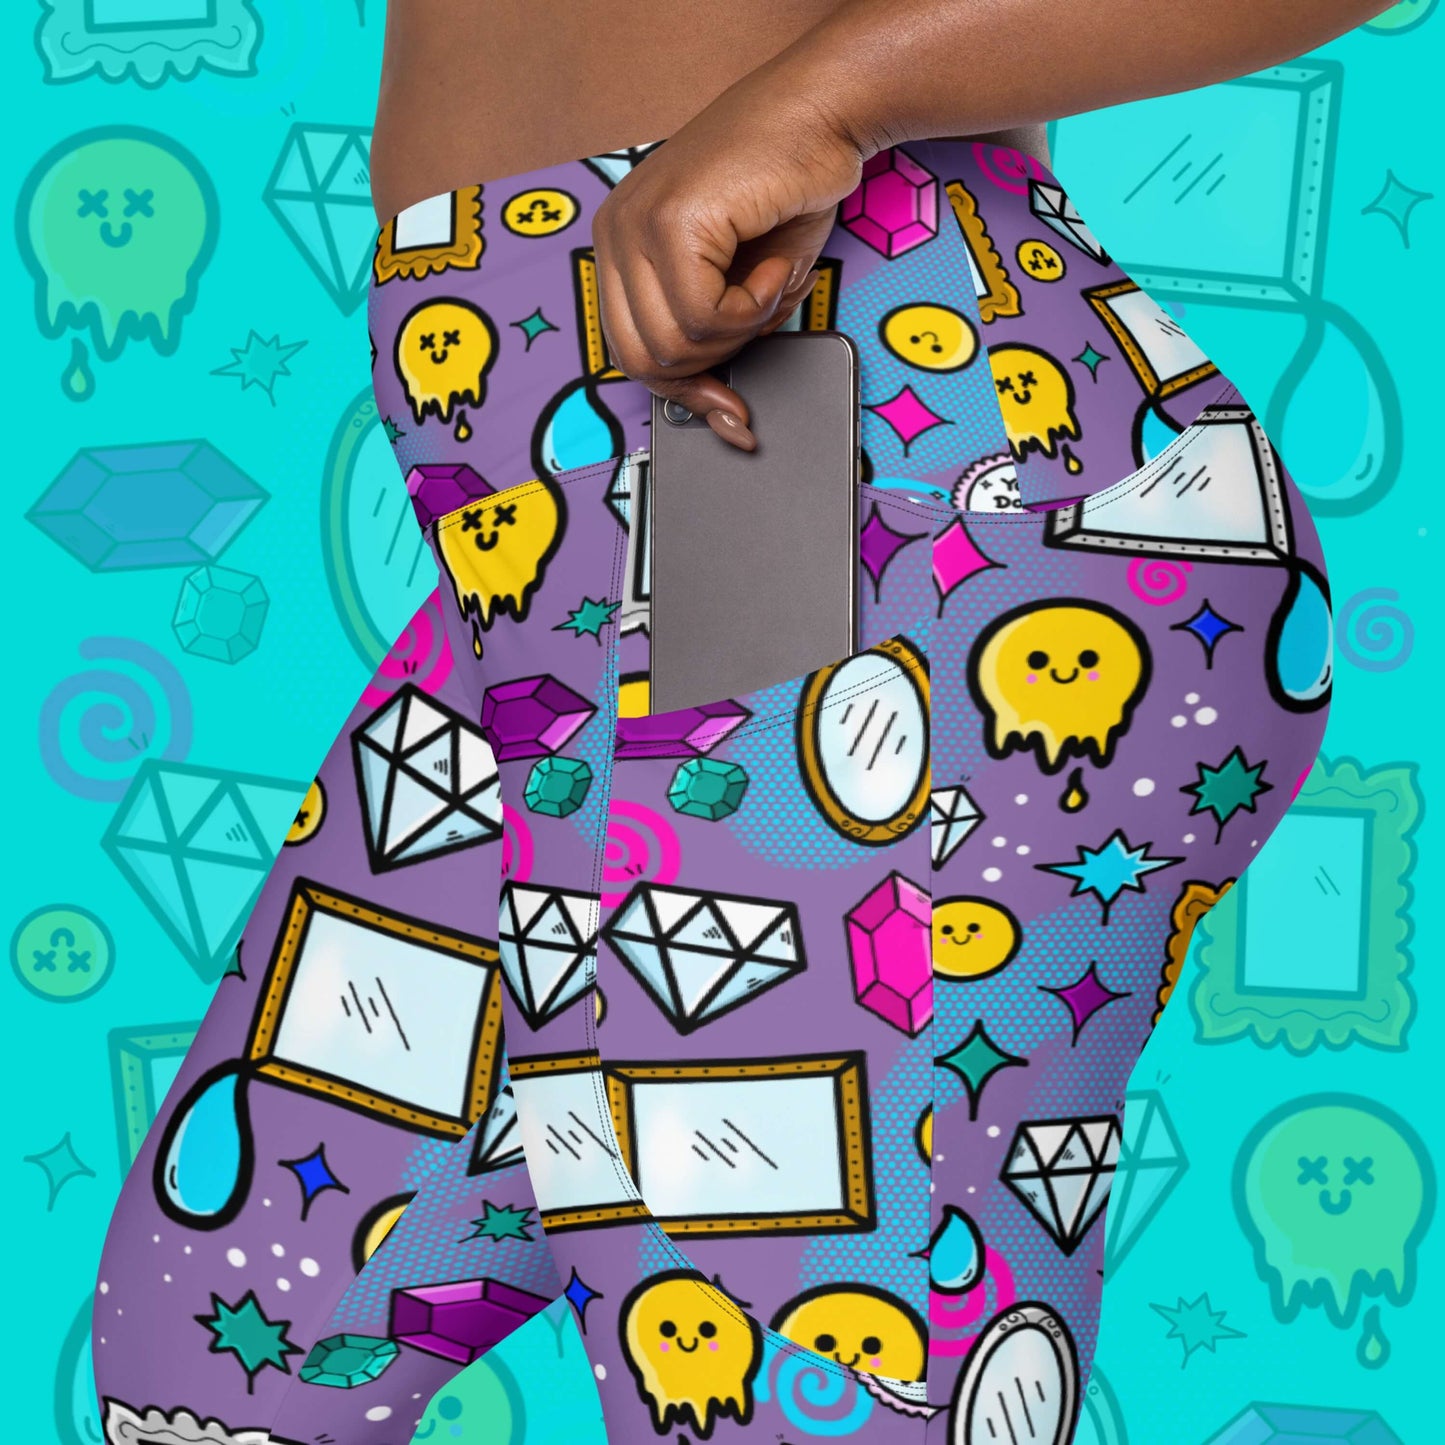 The You Don't Look Sick Leggings with pockets modelled on a blue background with a faded version of the print, the model is popping a grey phone into the legging pocket. The purple base leggings features melting yellow smiley faces, mirrors, gemstones, teardrops, sparkles, swirls and dots with a centre hand held mirror reading 'you don't look sick'. The hand drawn design is raising awareness for invisible illnesses.